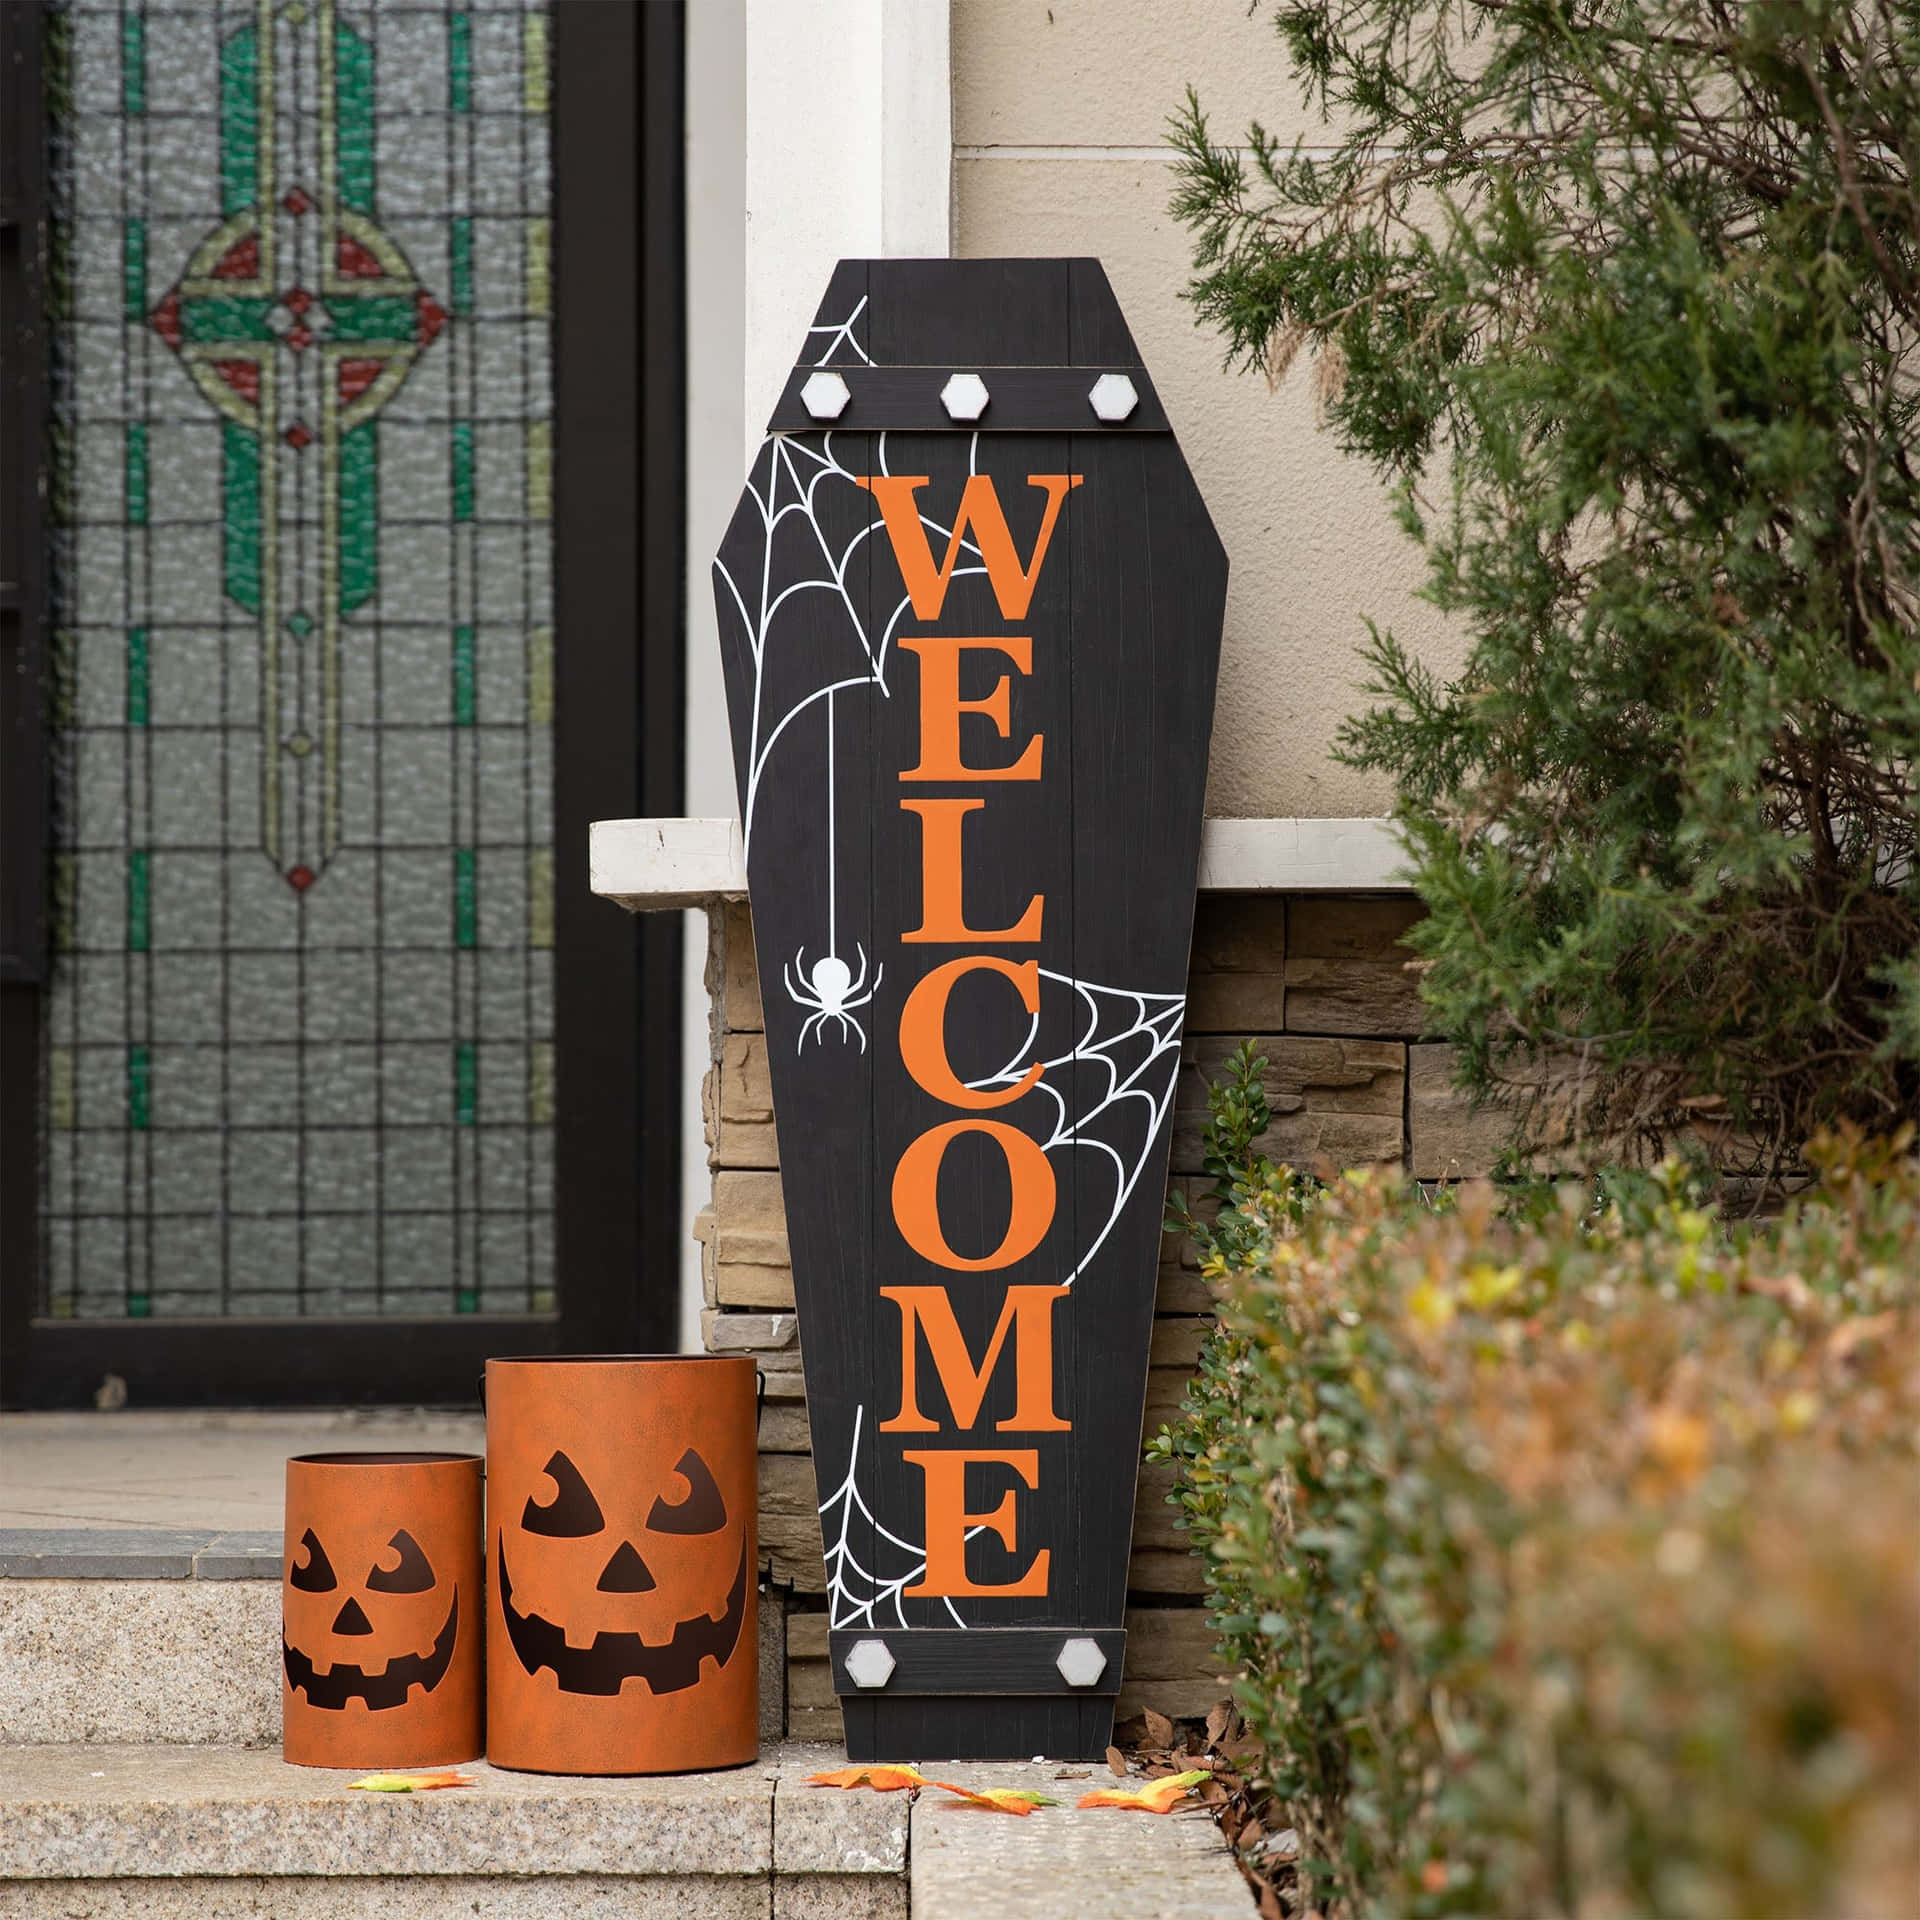 Get spooky with a creepy coffin on Halloween! Wallpaper